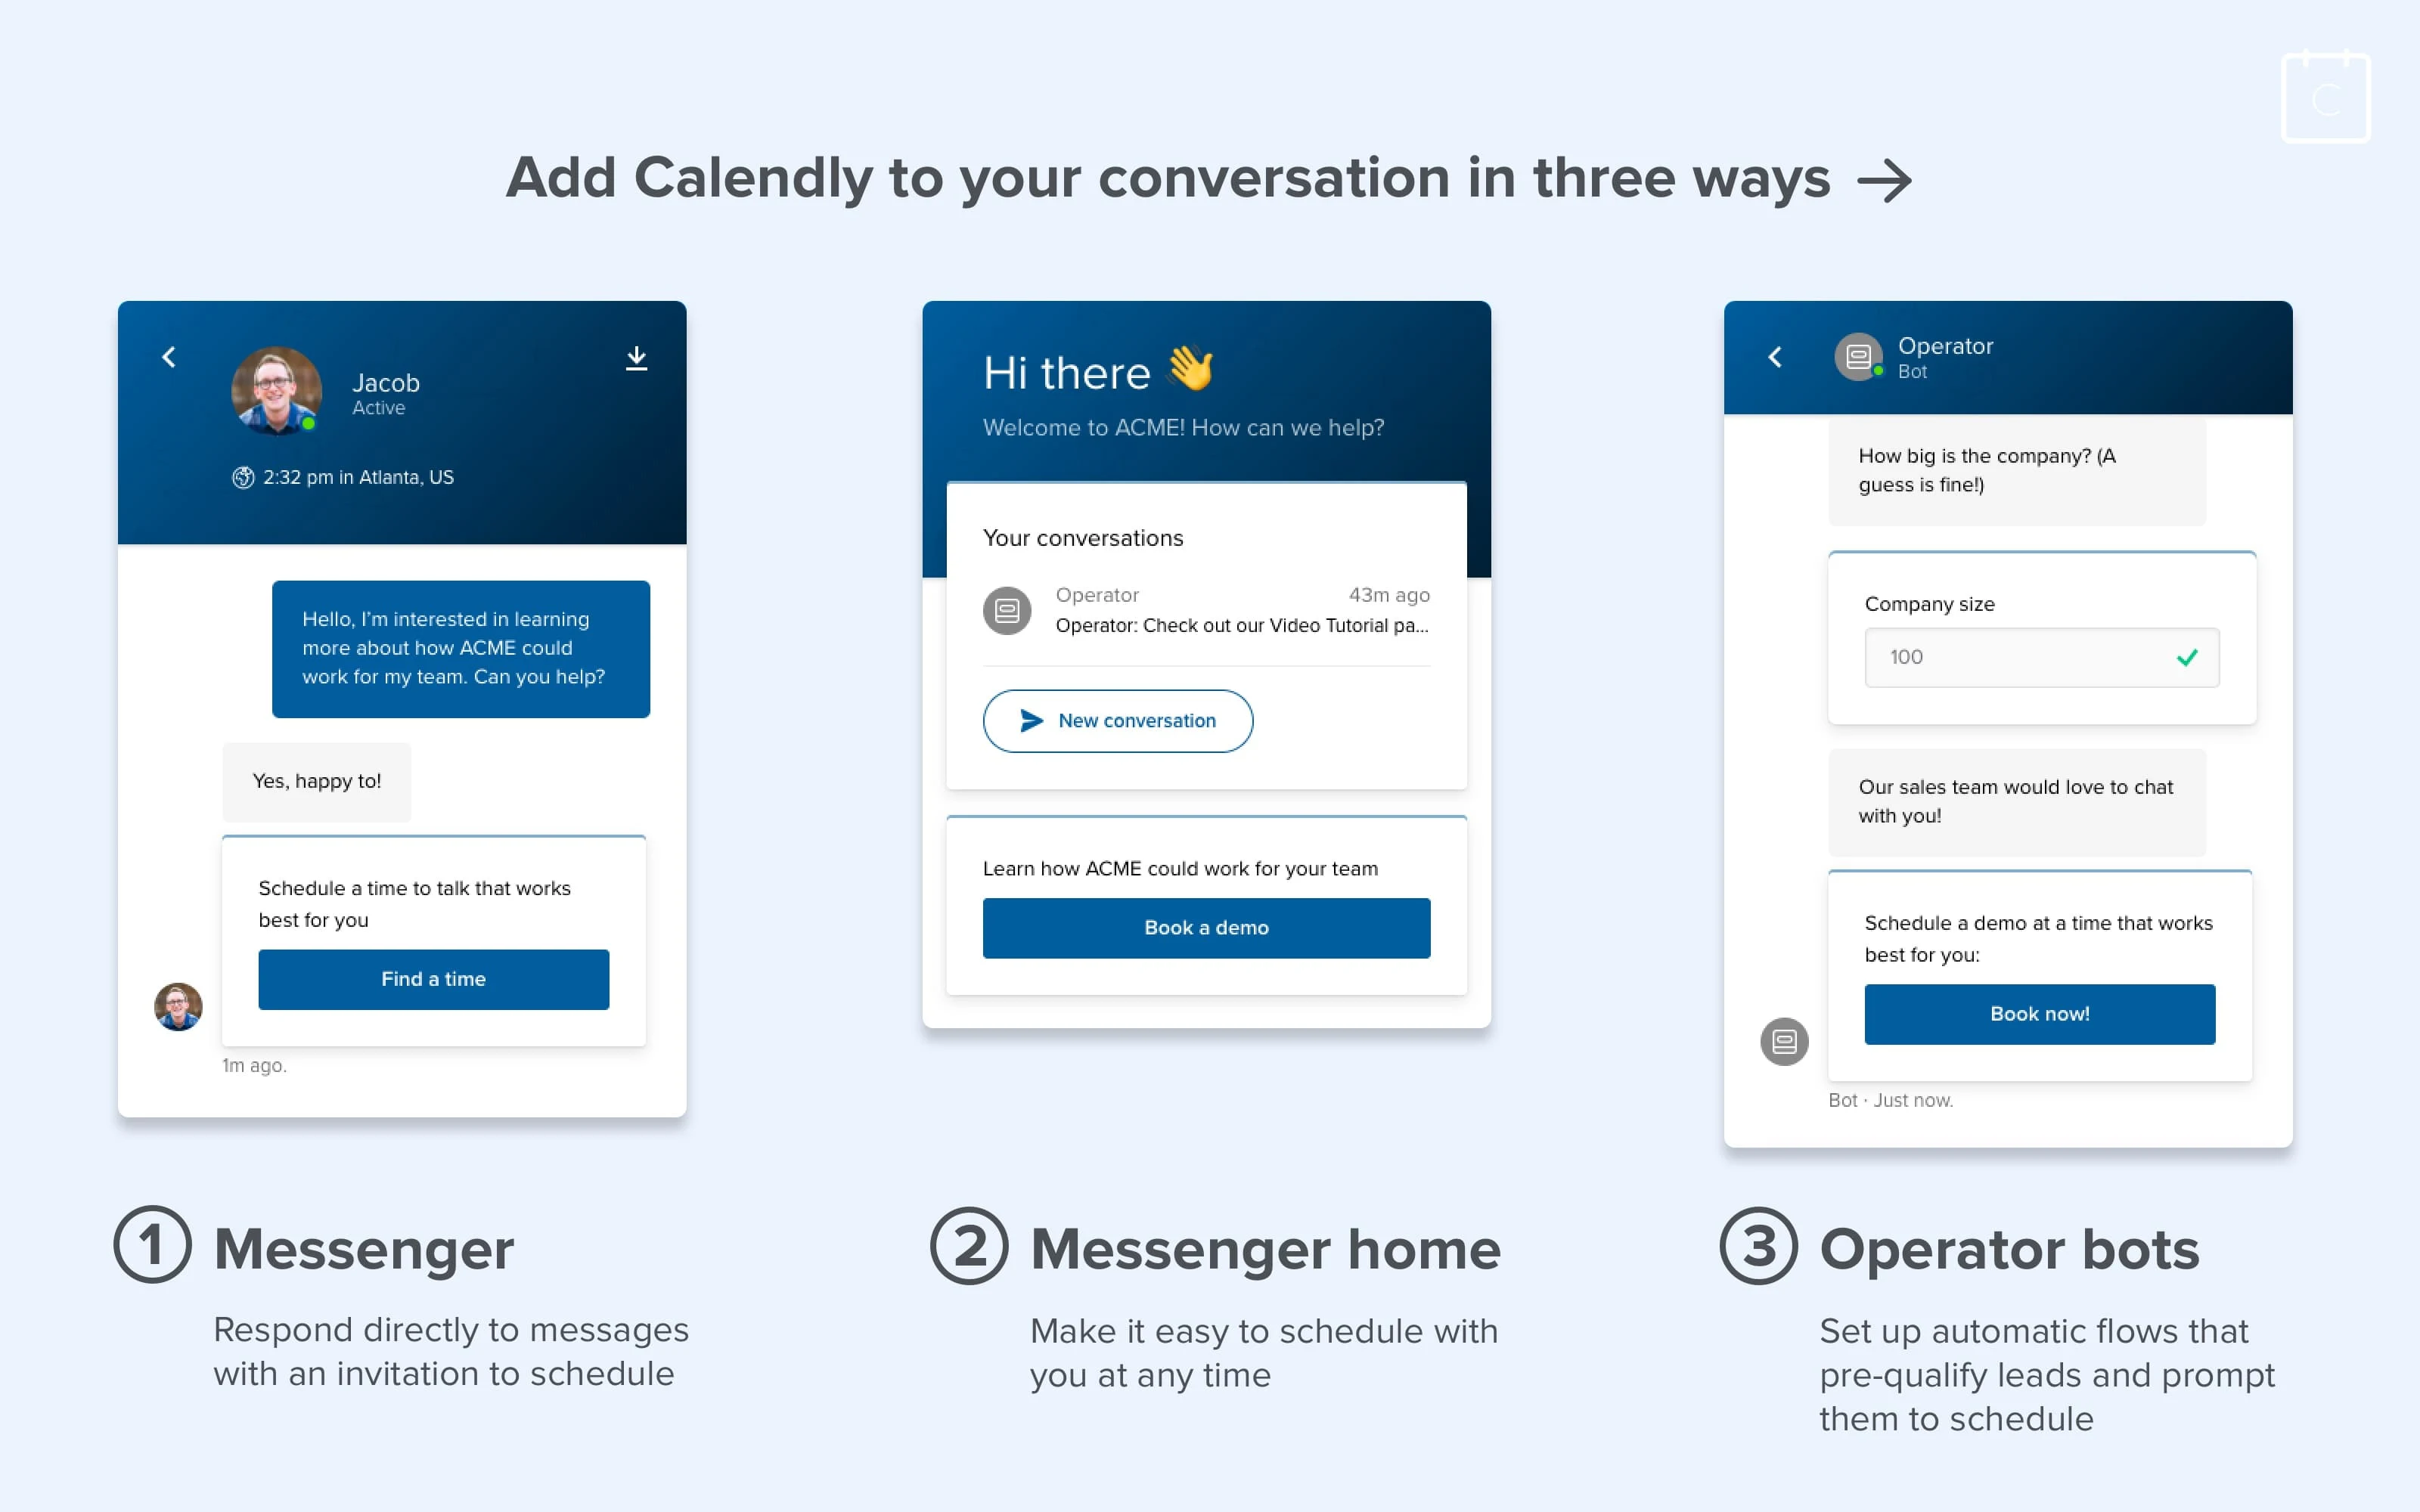 Add Calendly to your conversation via Messenger, Messenger home, or Operator bots.